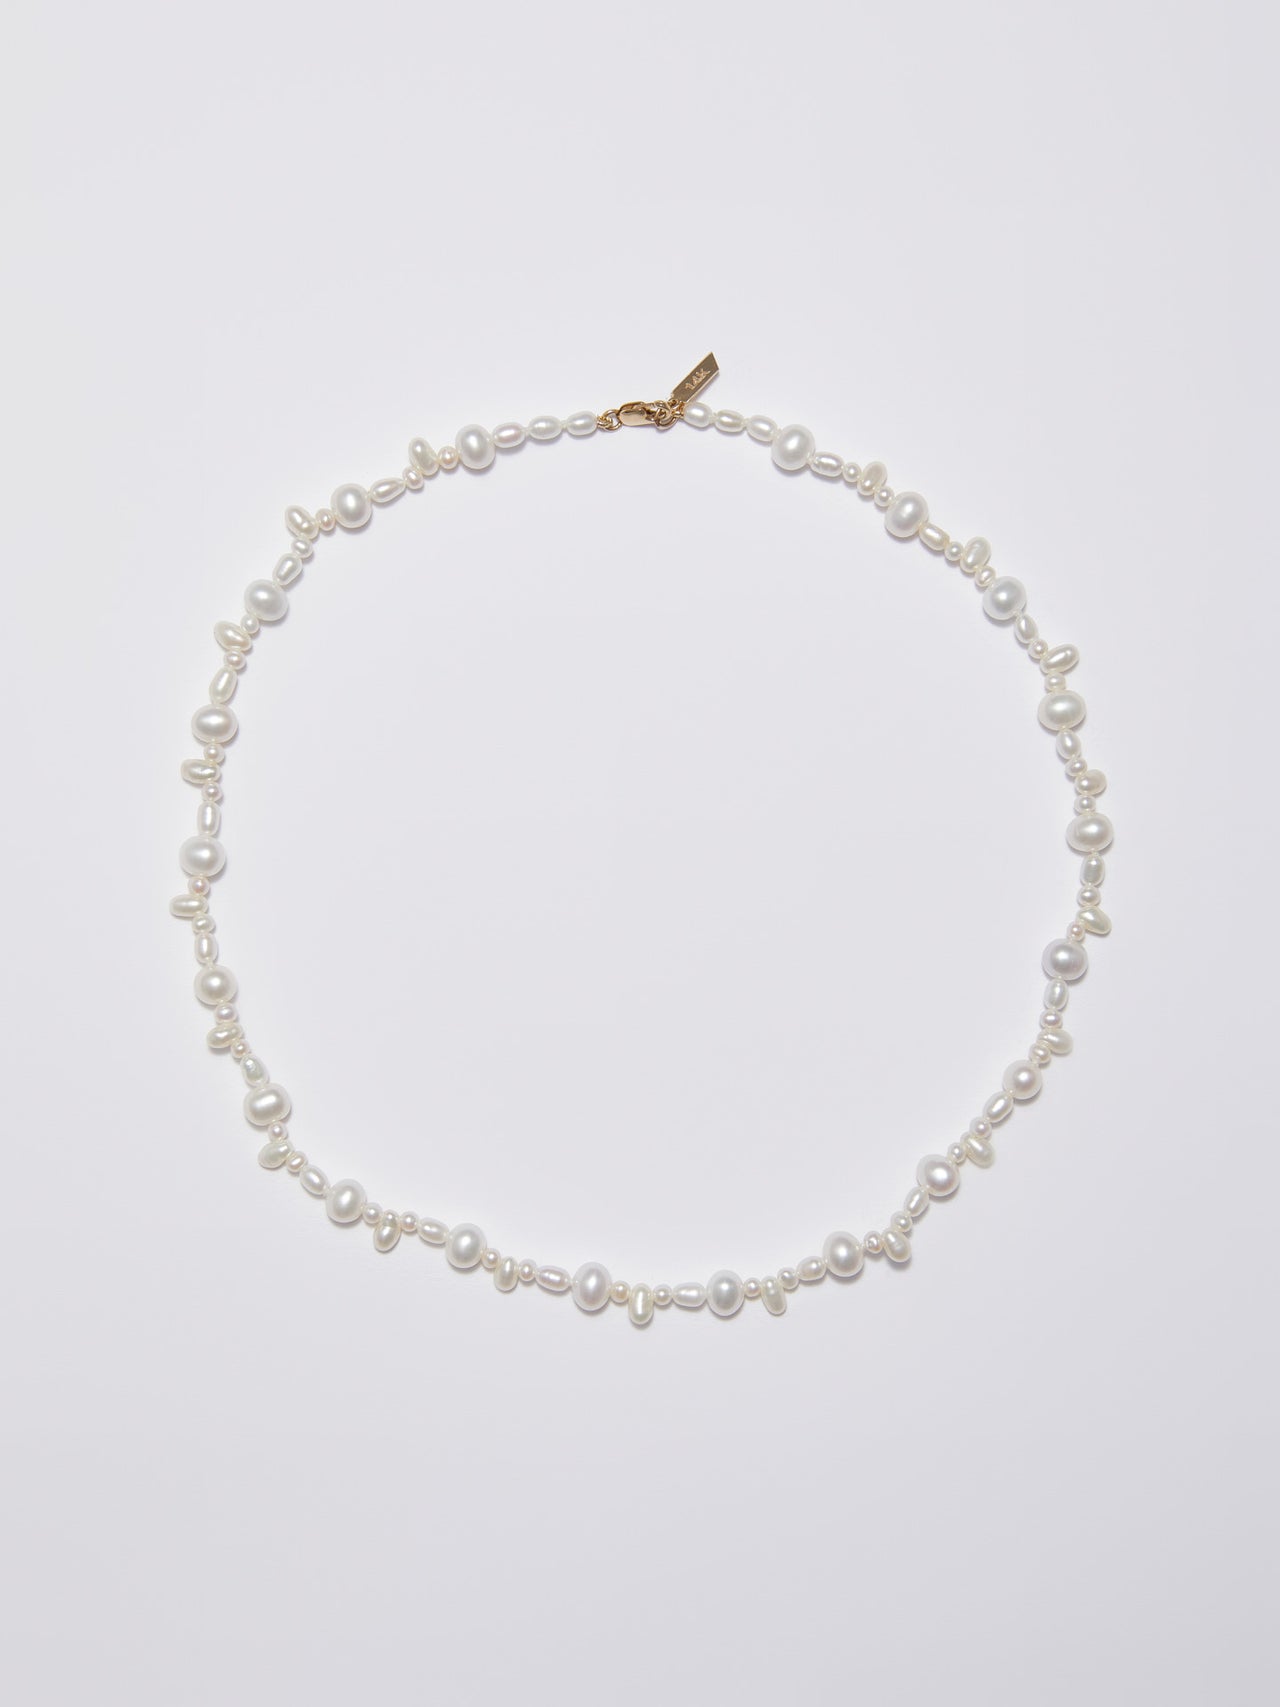 Belisimo Pearl Strand: Freshwater Mixed Pearl Strand 14kt Yellow Gold Closure 16'' Total Length